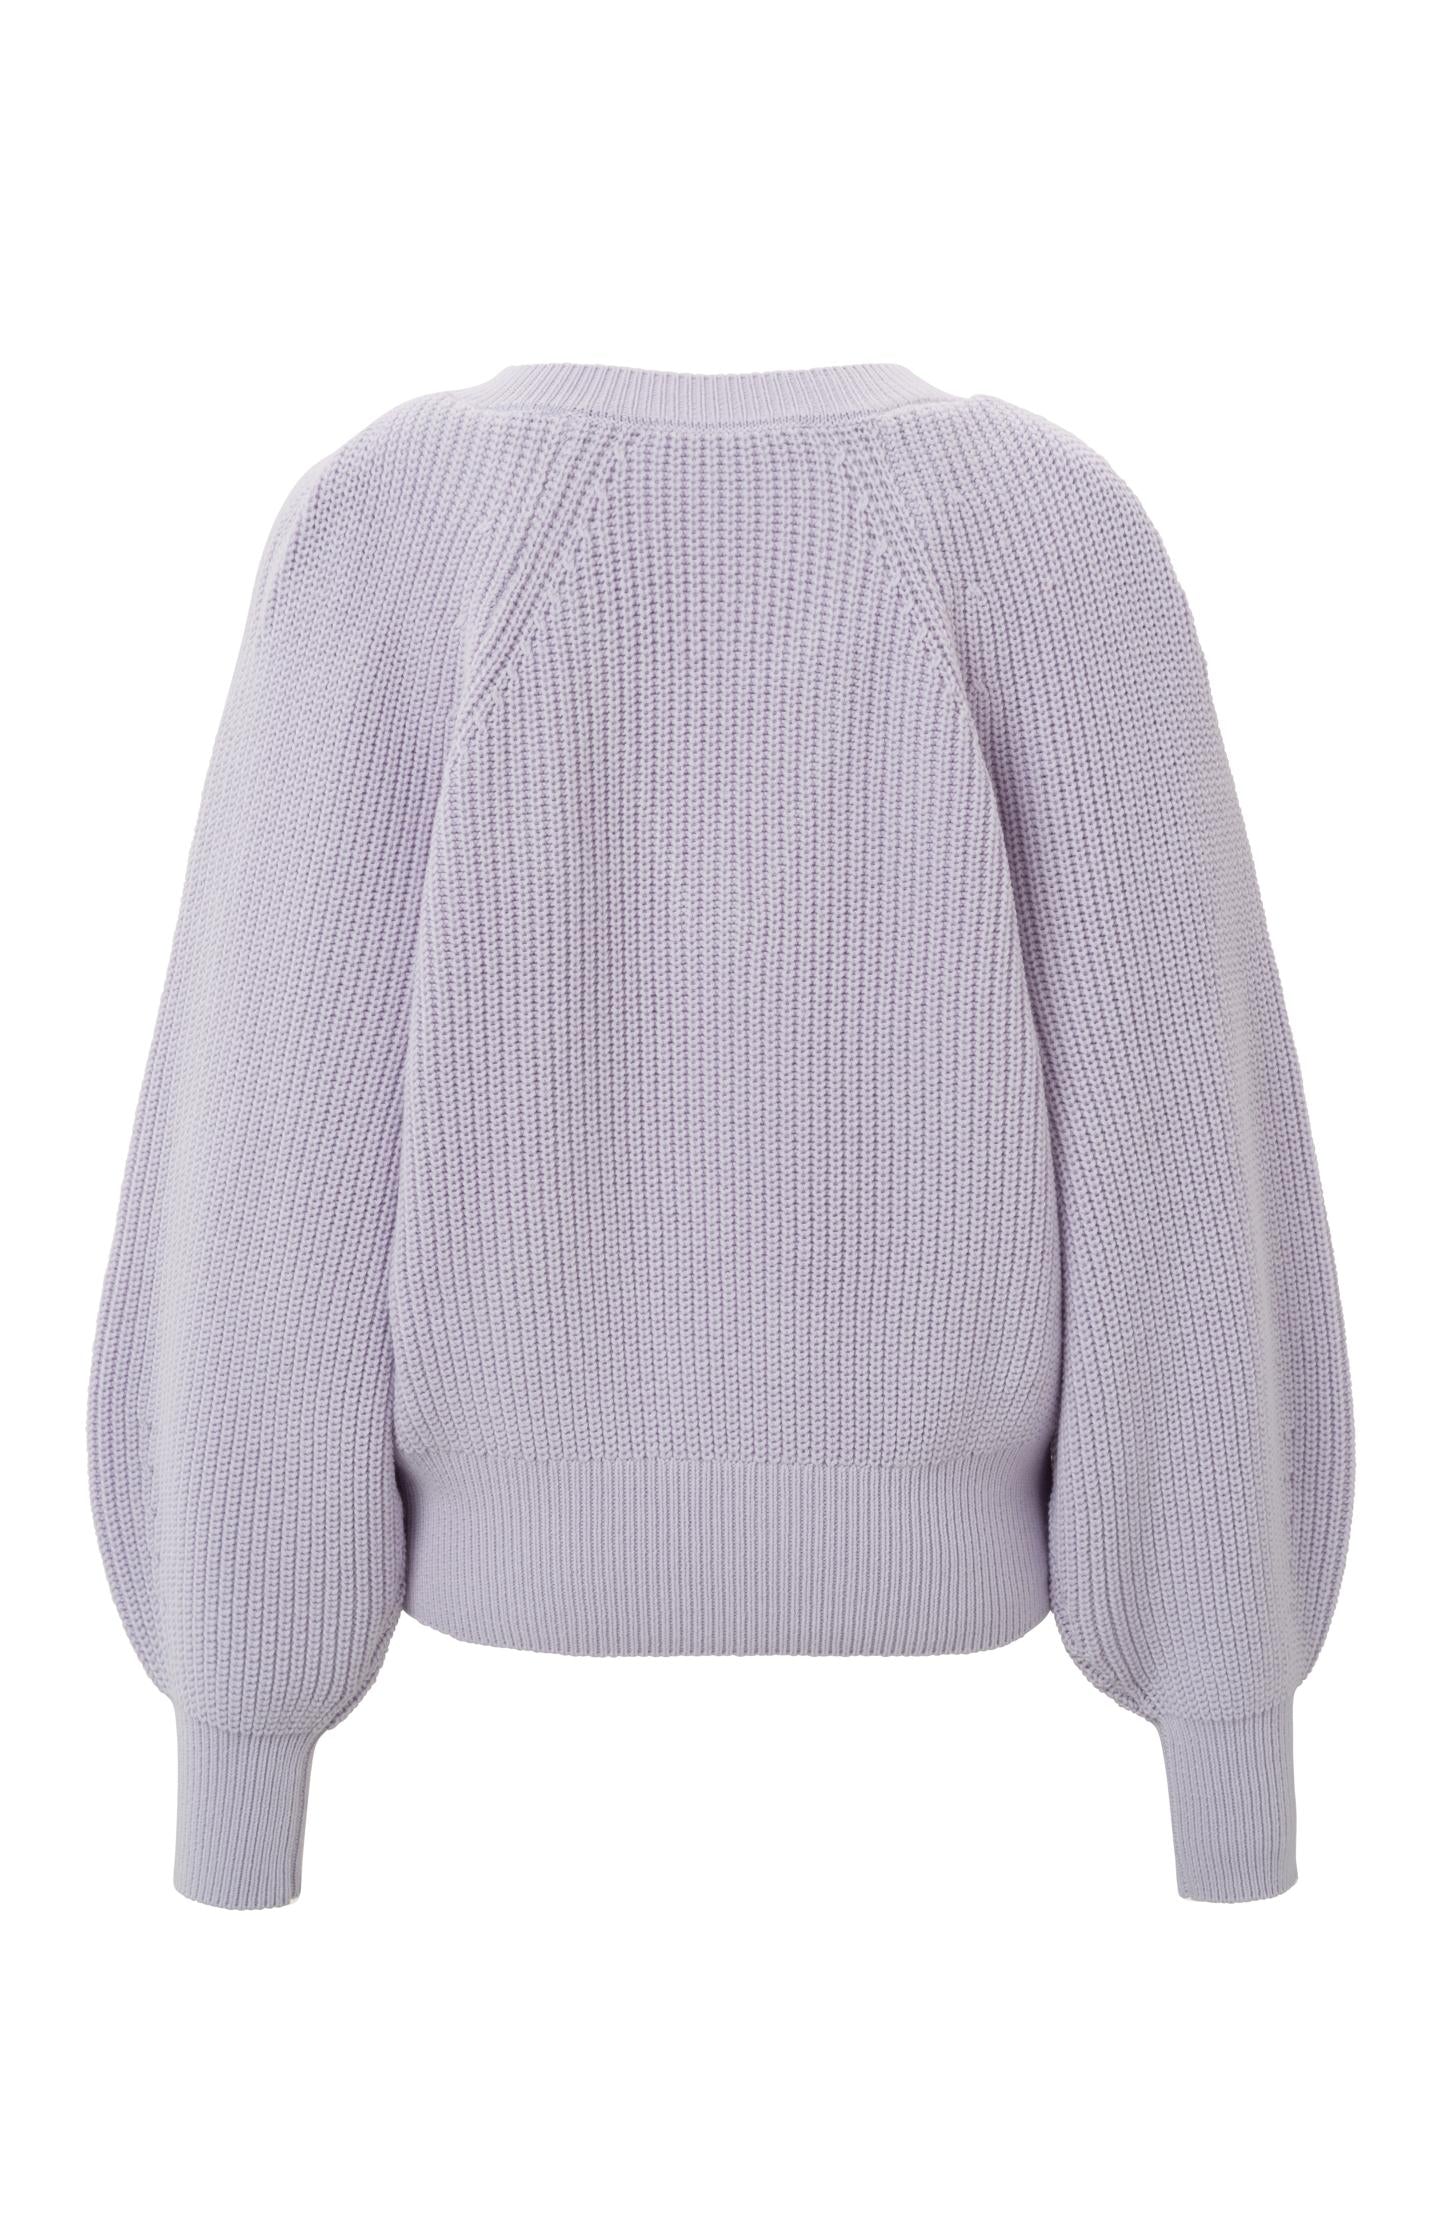 V-neck sweater with long balloon sleeves and ribbed details